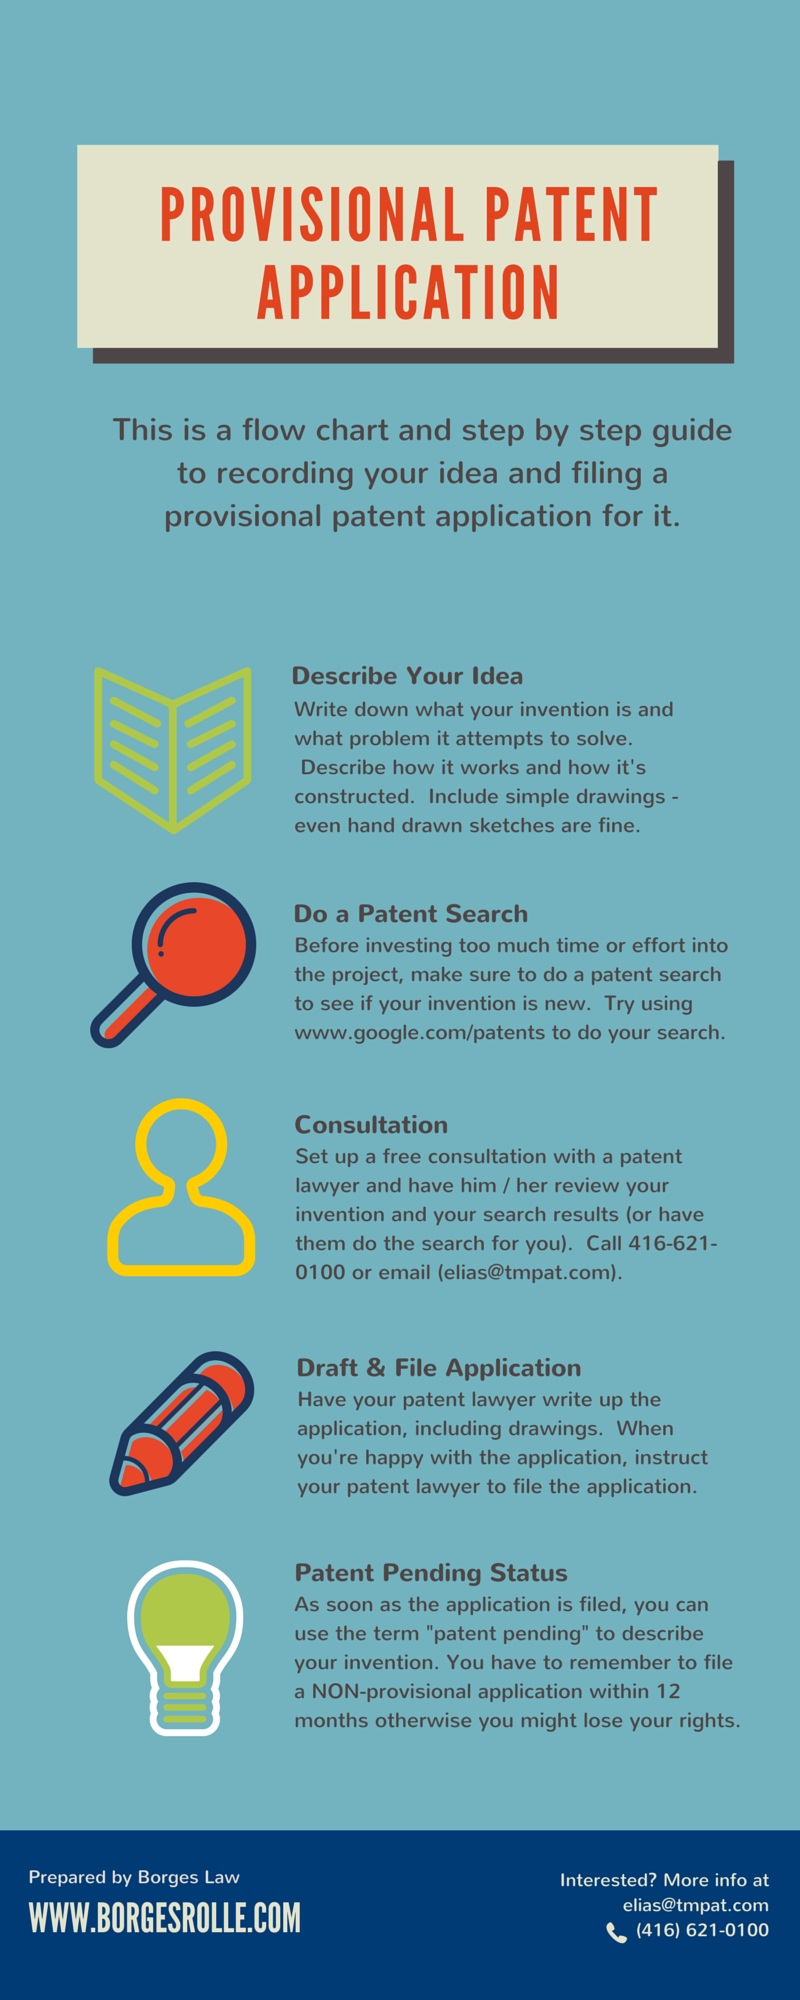 10 Elegant How Much Is It To Patent An Idea provisional patent application how to file infographic 11 2022